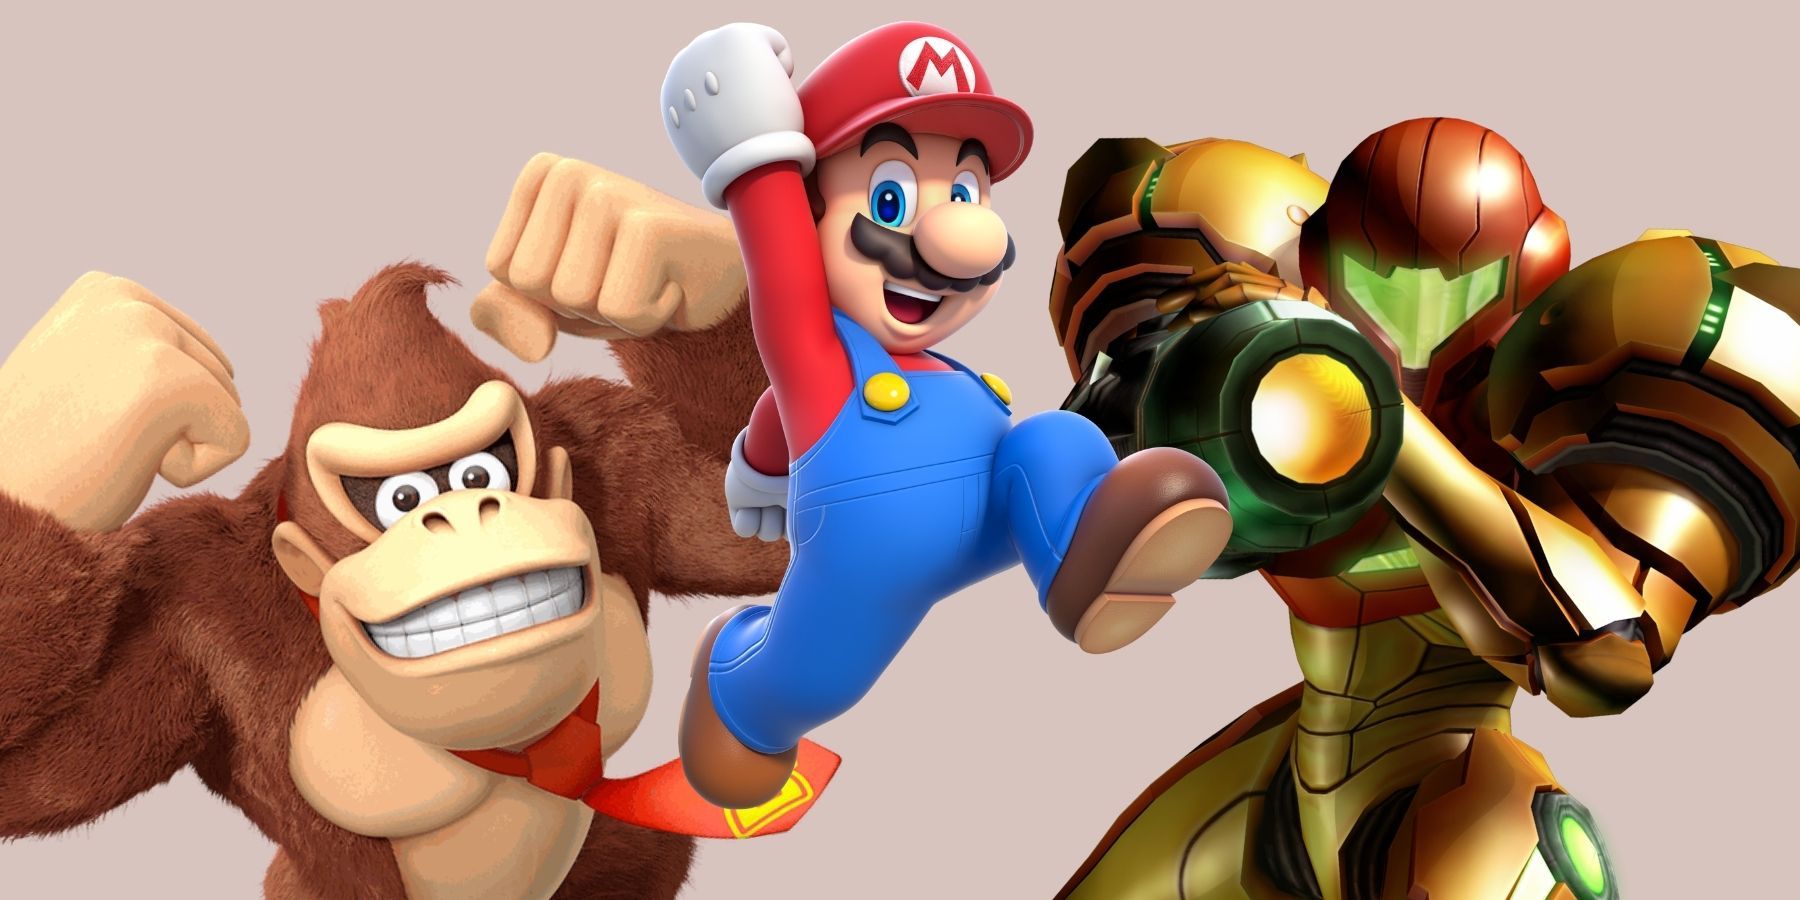 2022 possible switch games mario donkey kong metroid